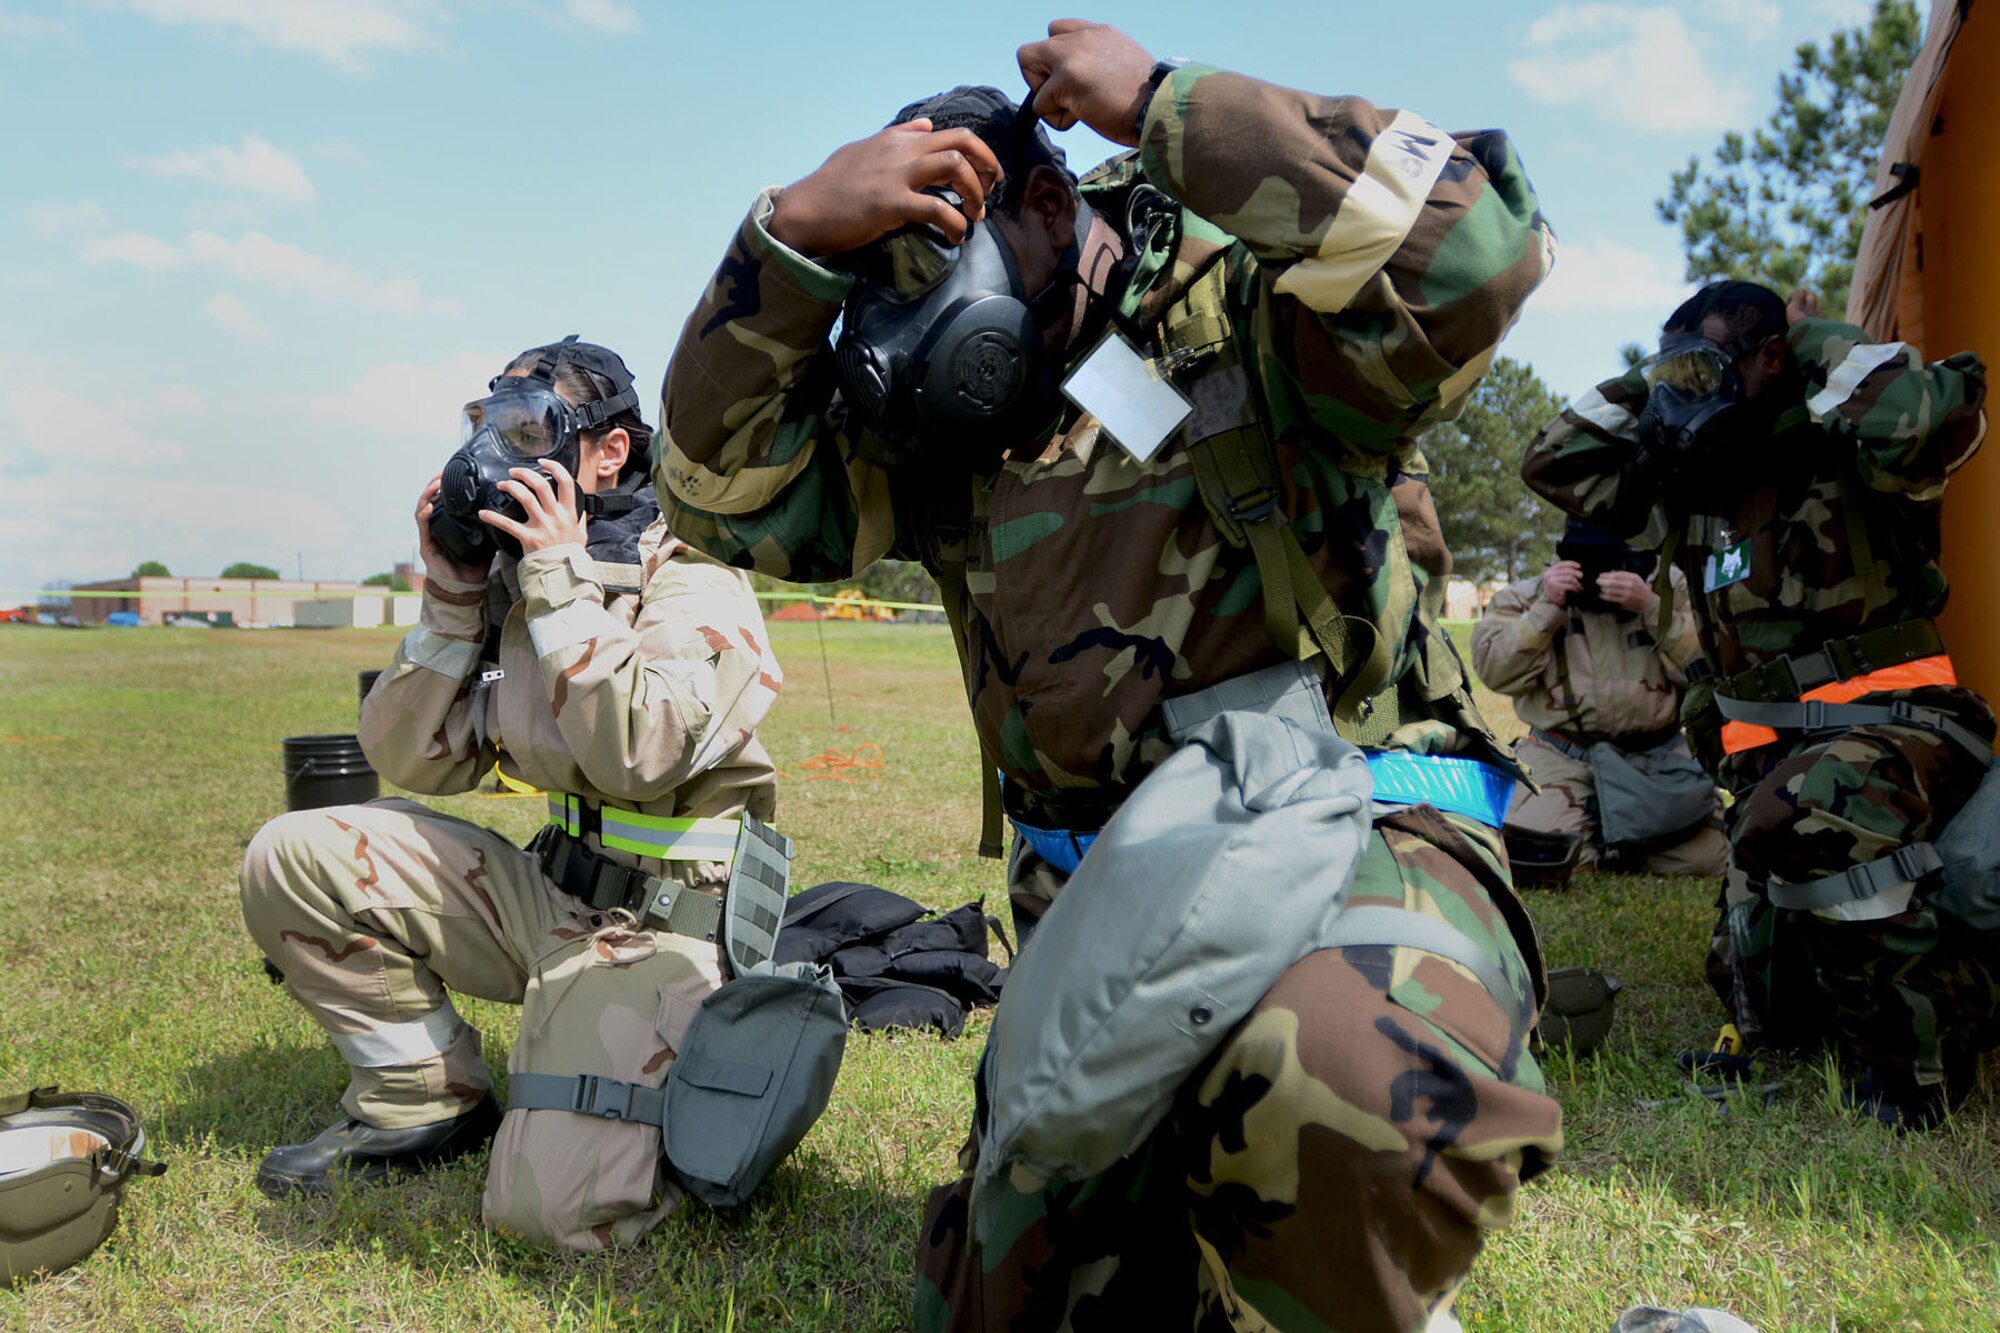 U.S. Air Force Airmen with the 169th Fighter Wing at McEntire Joint National Guard Base, S.C., don their gas masks in response to a simulated chemical attack during a Readiness Exercise, April 12, 2013. Members of the 169th Fighter Wing are preparing for a Phase I and II Readiness Inspection, which evaluates a unit's ability to deploy, then operate and launch missions in a chemical combat environment.  (U.S. Air National Guard photo by Tech. Sgt. Caycee Watson/Released)